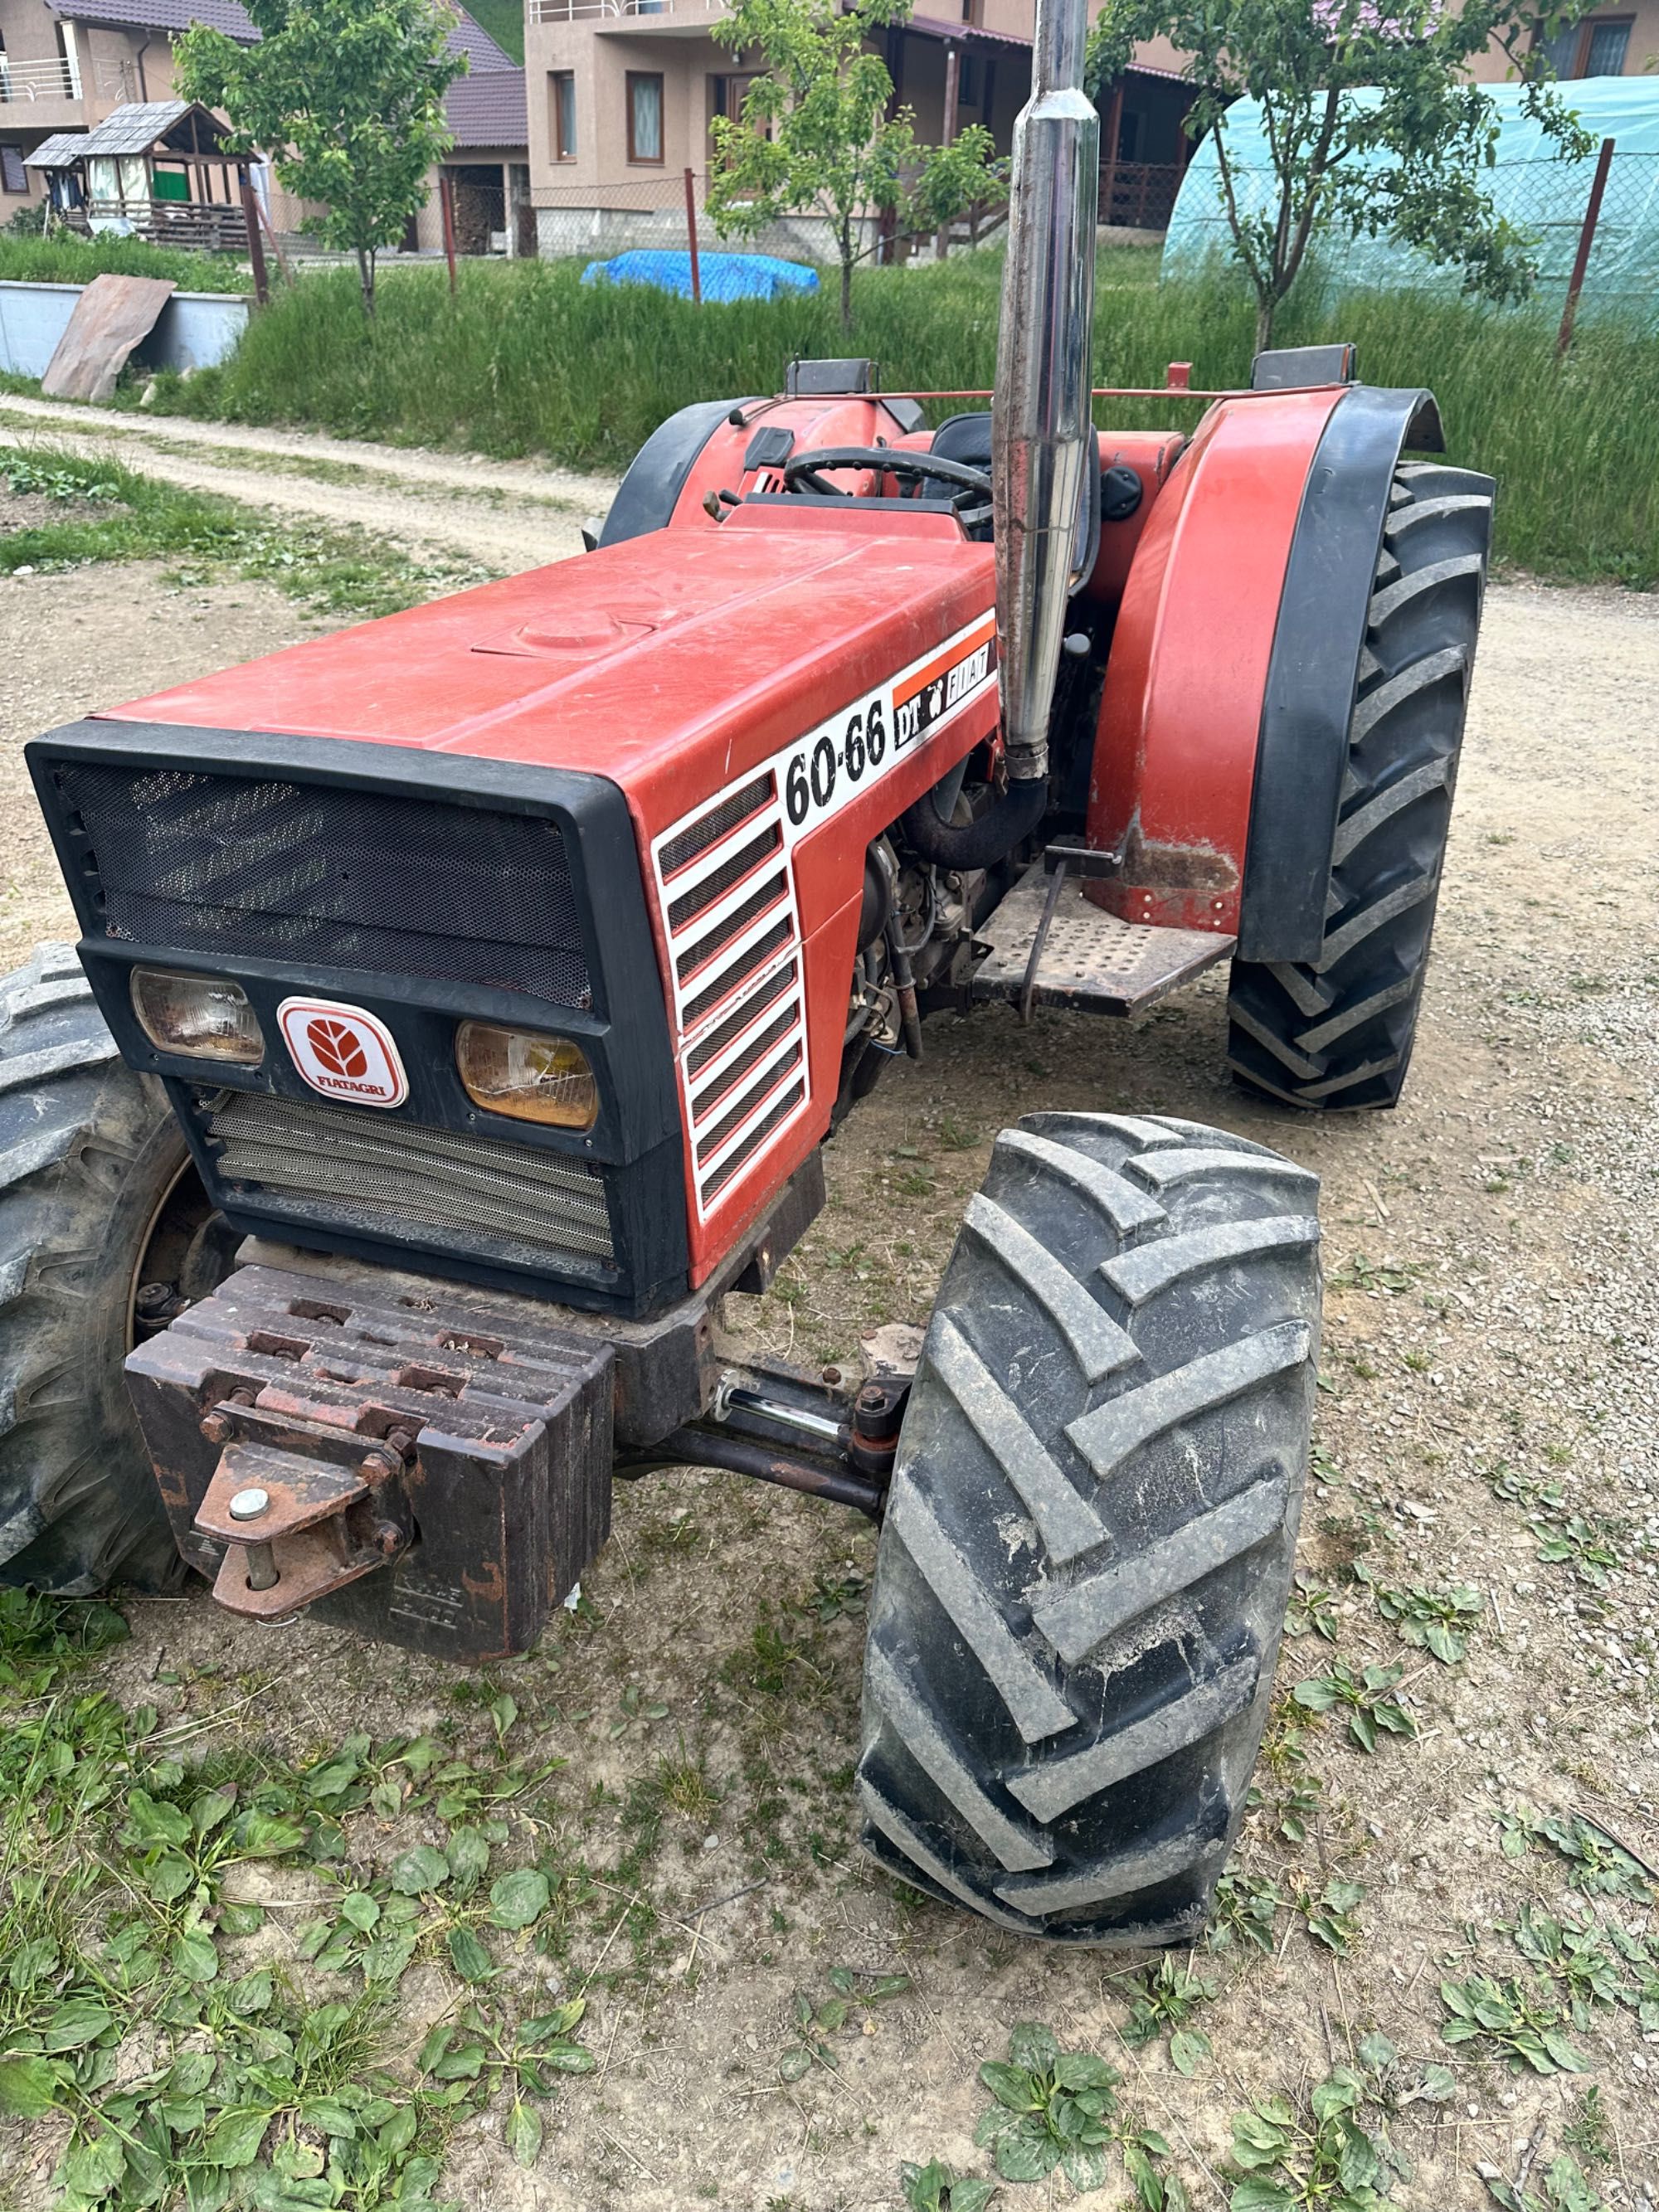 Tractor Fiat 60-66 dt